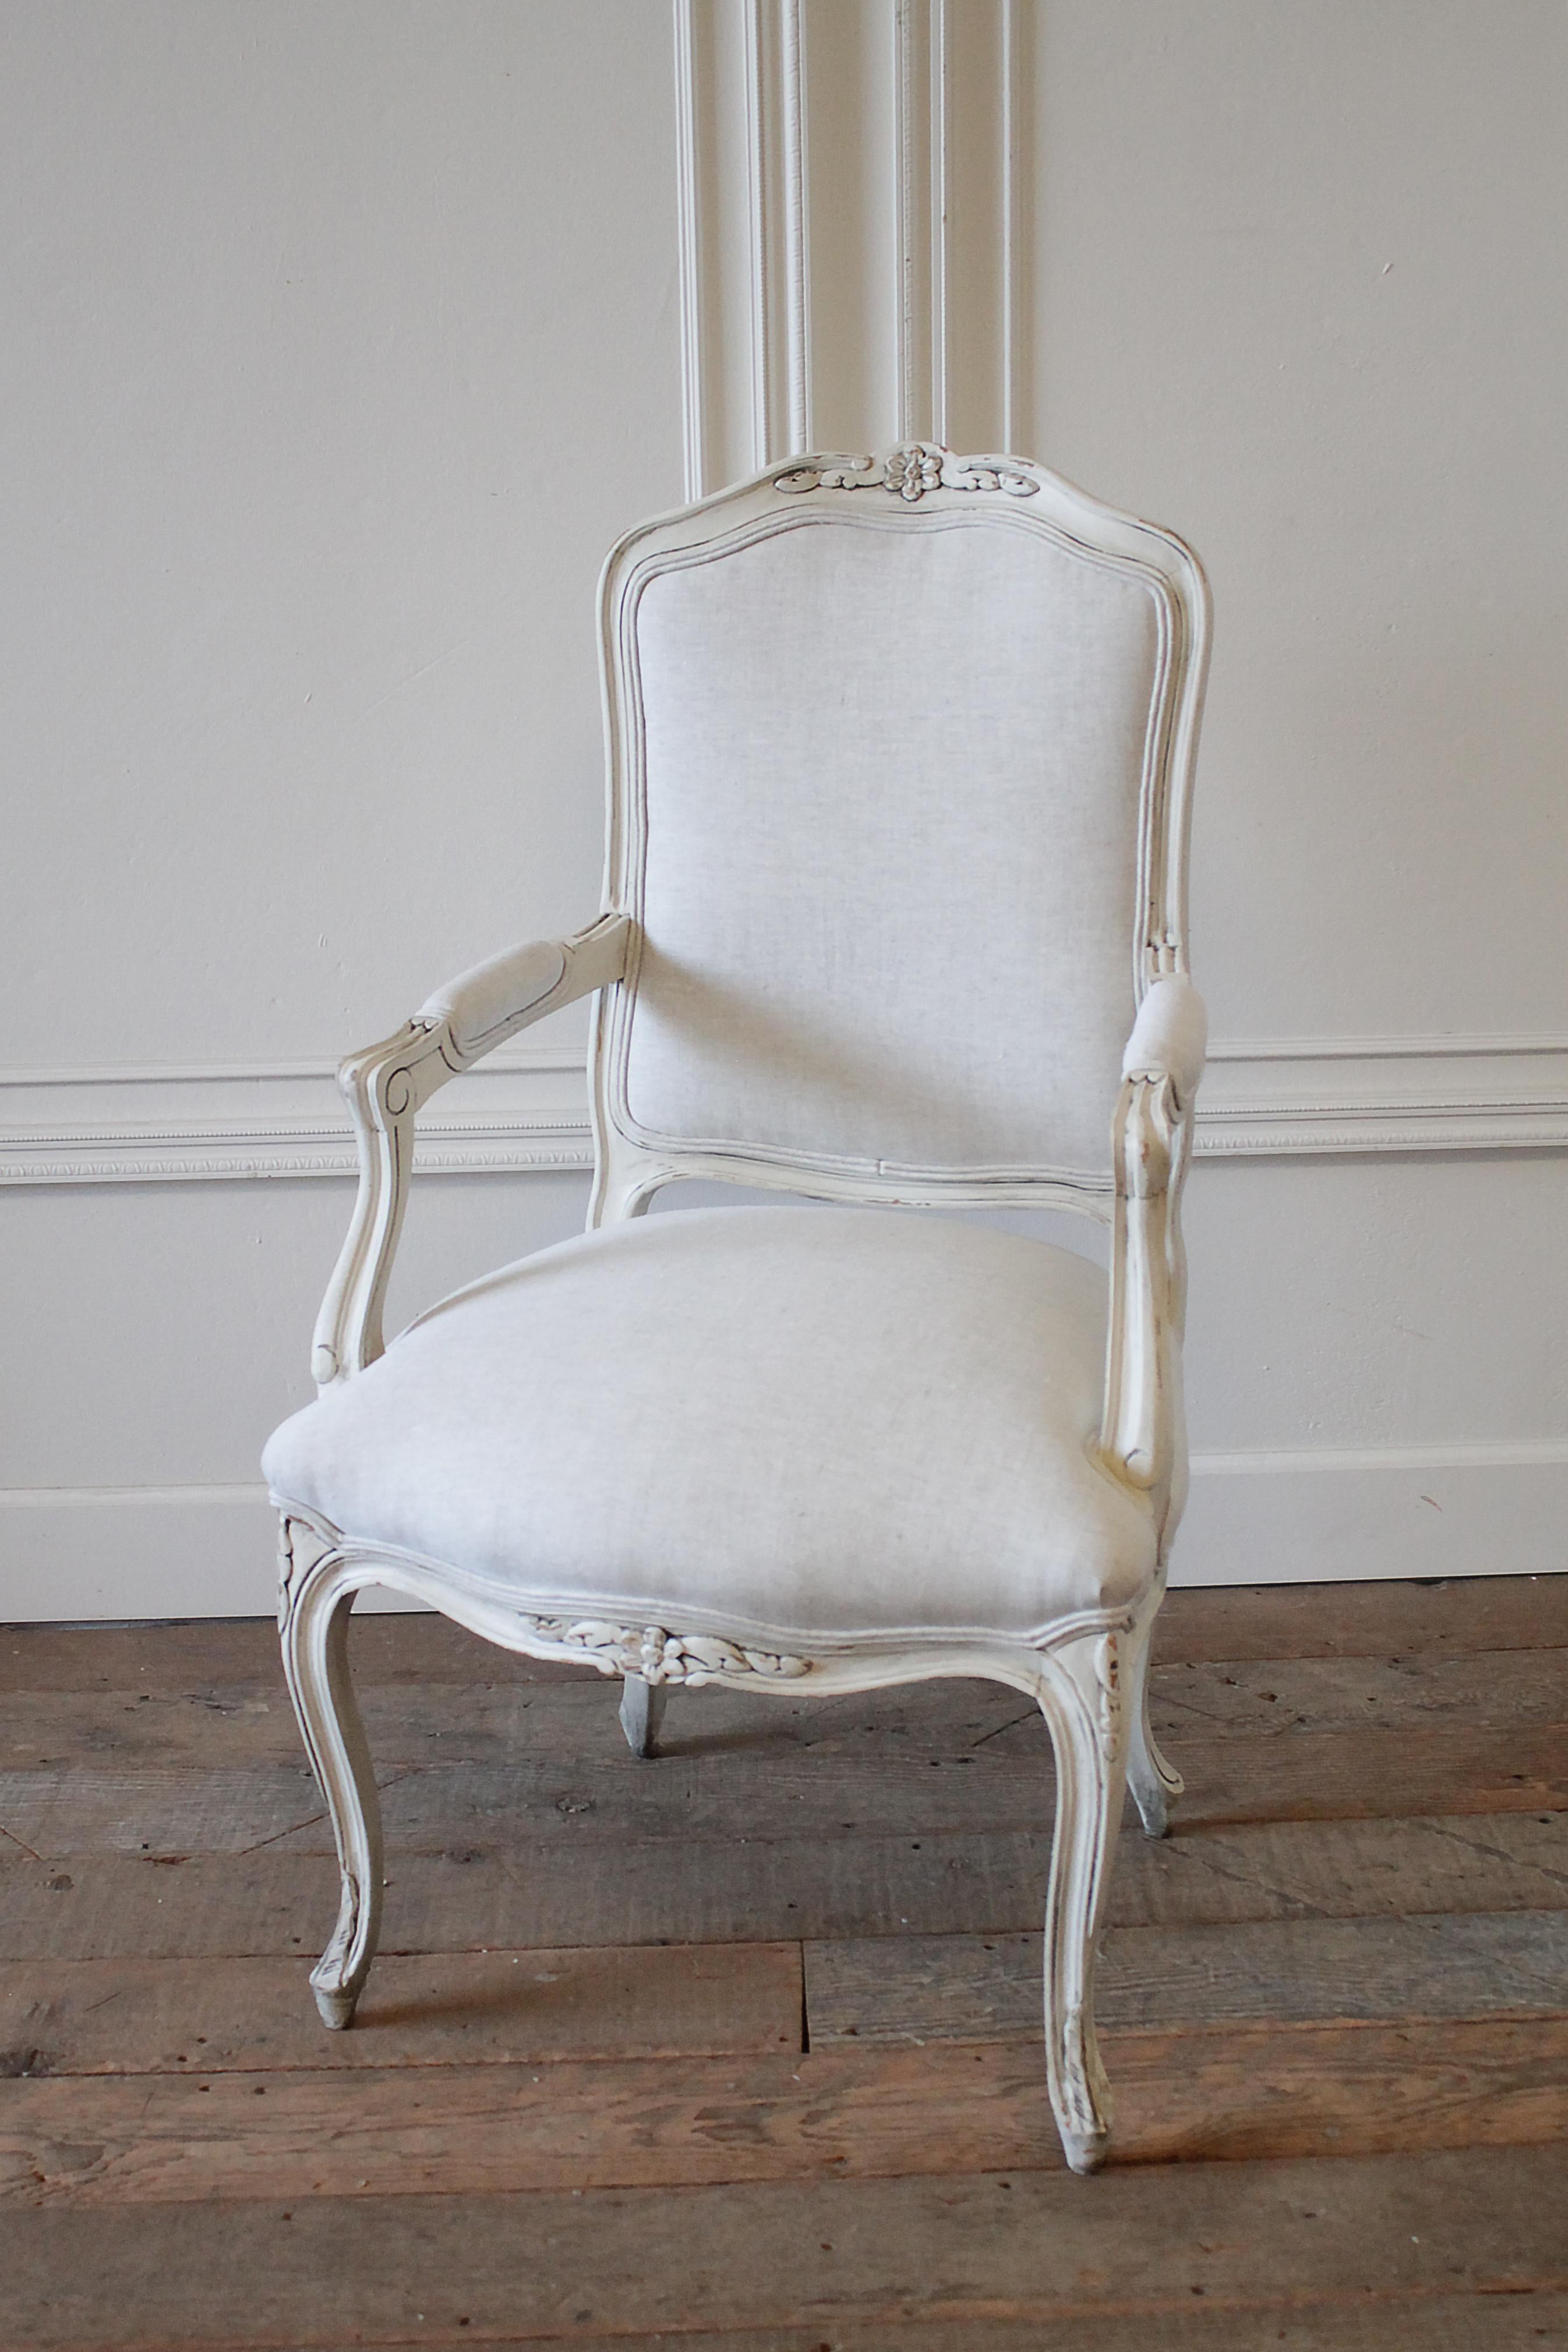 Painted French provincial style chair and ottoman upholstered in Belgian linen
painted in our oyster white finish with subtle distressed edges and finished with an antique glaze, give this set an aged patina. Subtle carvings on the inside backs,